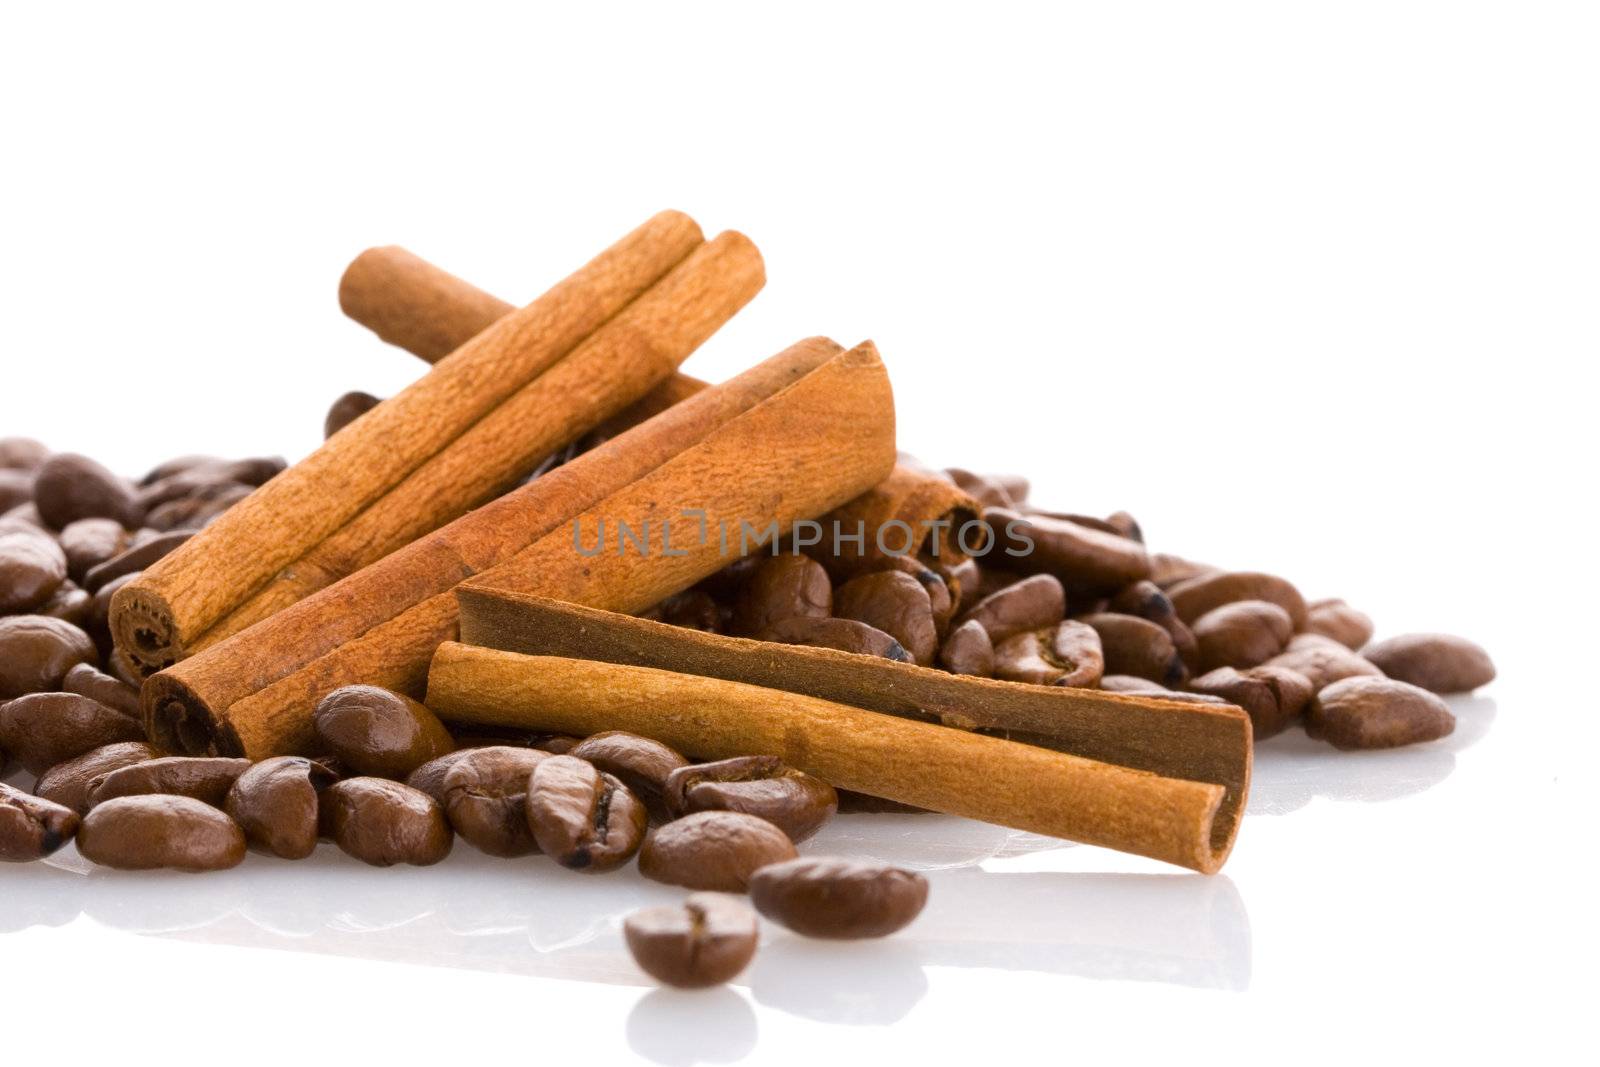 Cinnamon sticks and coffee beans on isolated background